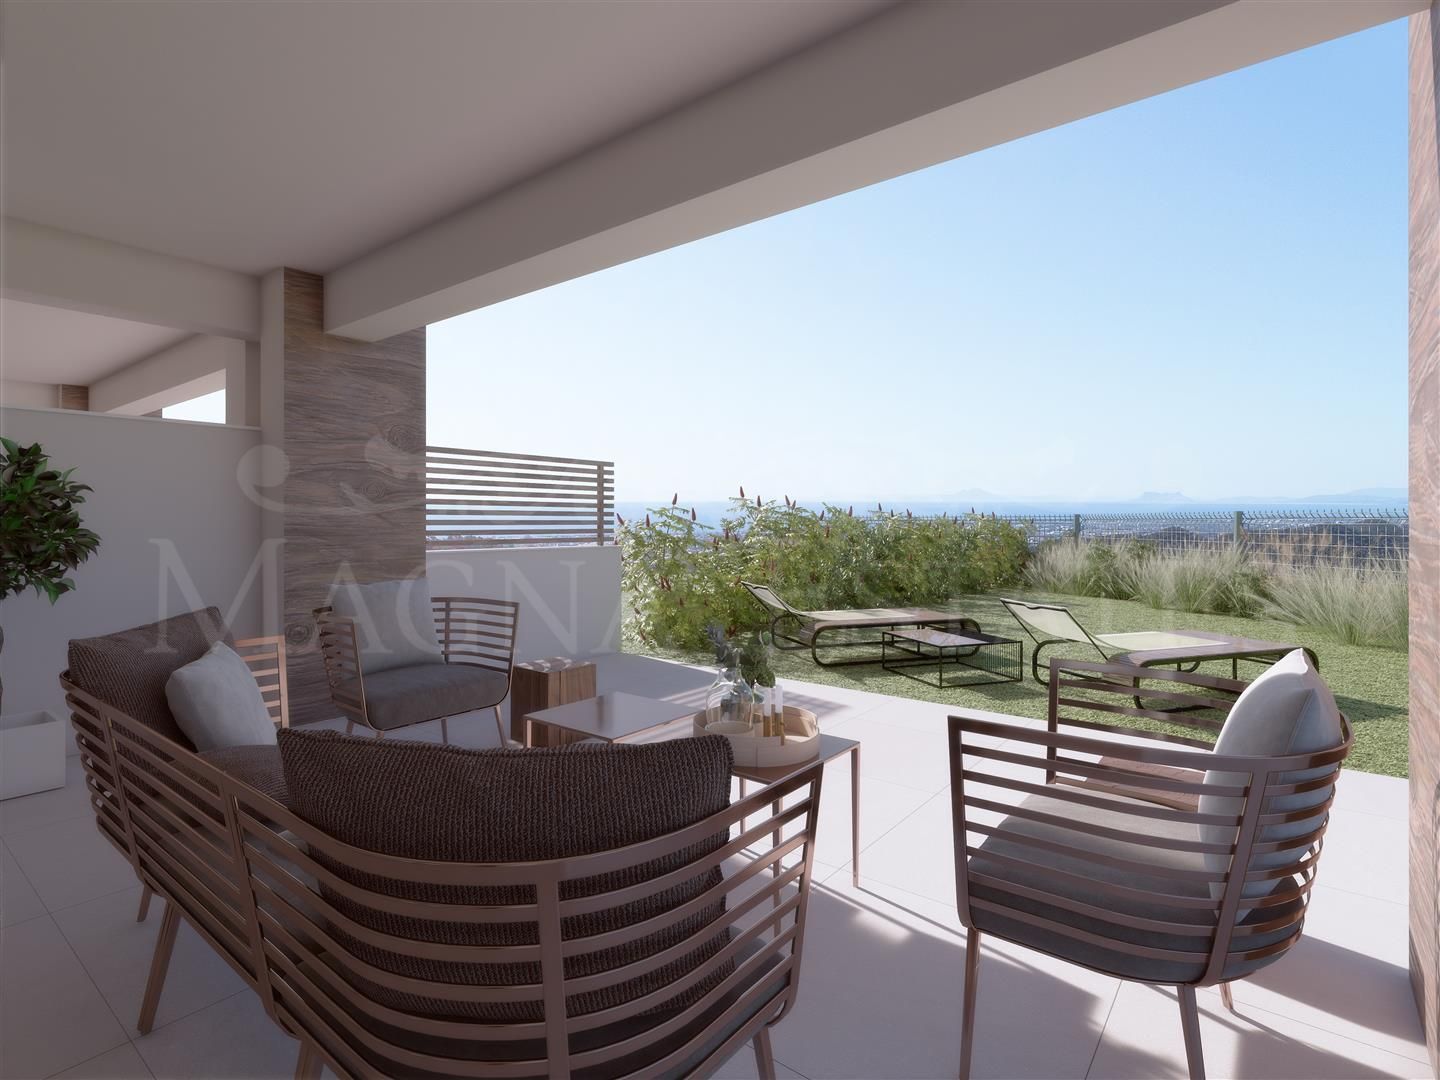 Newly built townhouses in the middle of Nature, in Marbella – Istán